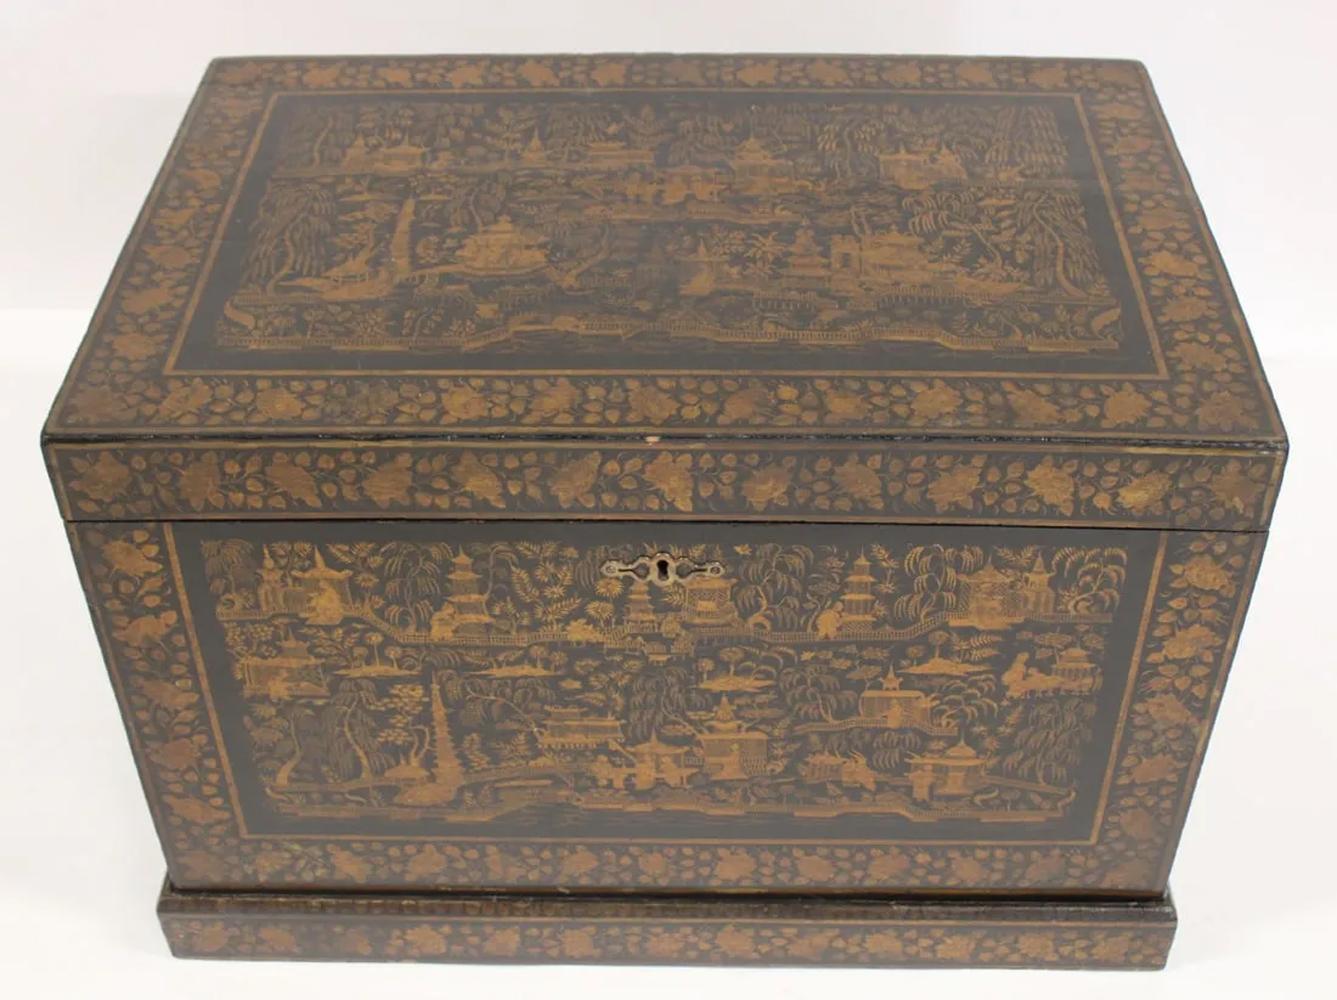 China Trade lift-top chest in black lacquer decorated on all four sides and top with landscape and garden scenes with buildings and pagodas with people engaged in various activities all within leaf and vine borders and raised on a separate plinth